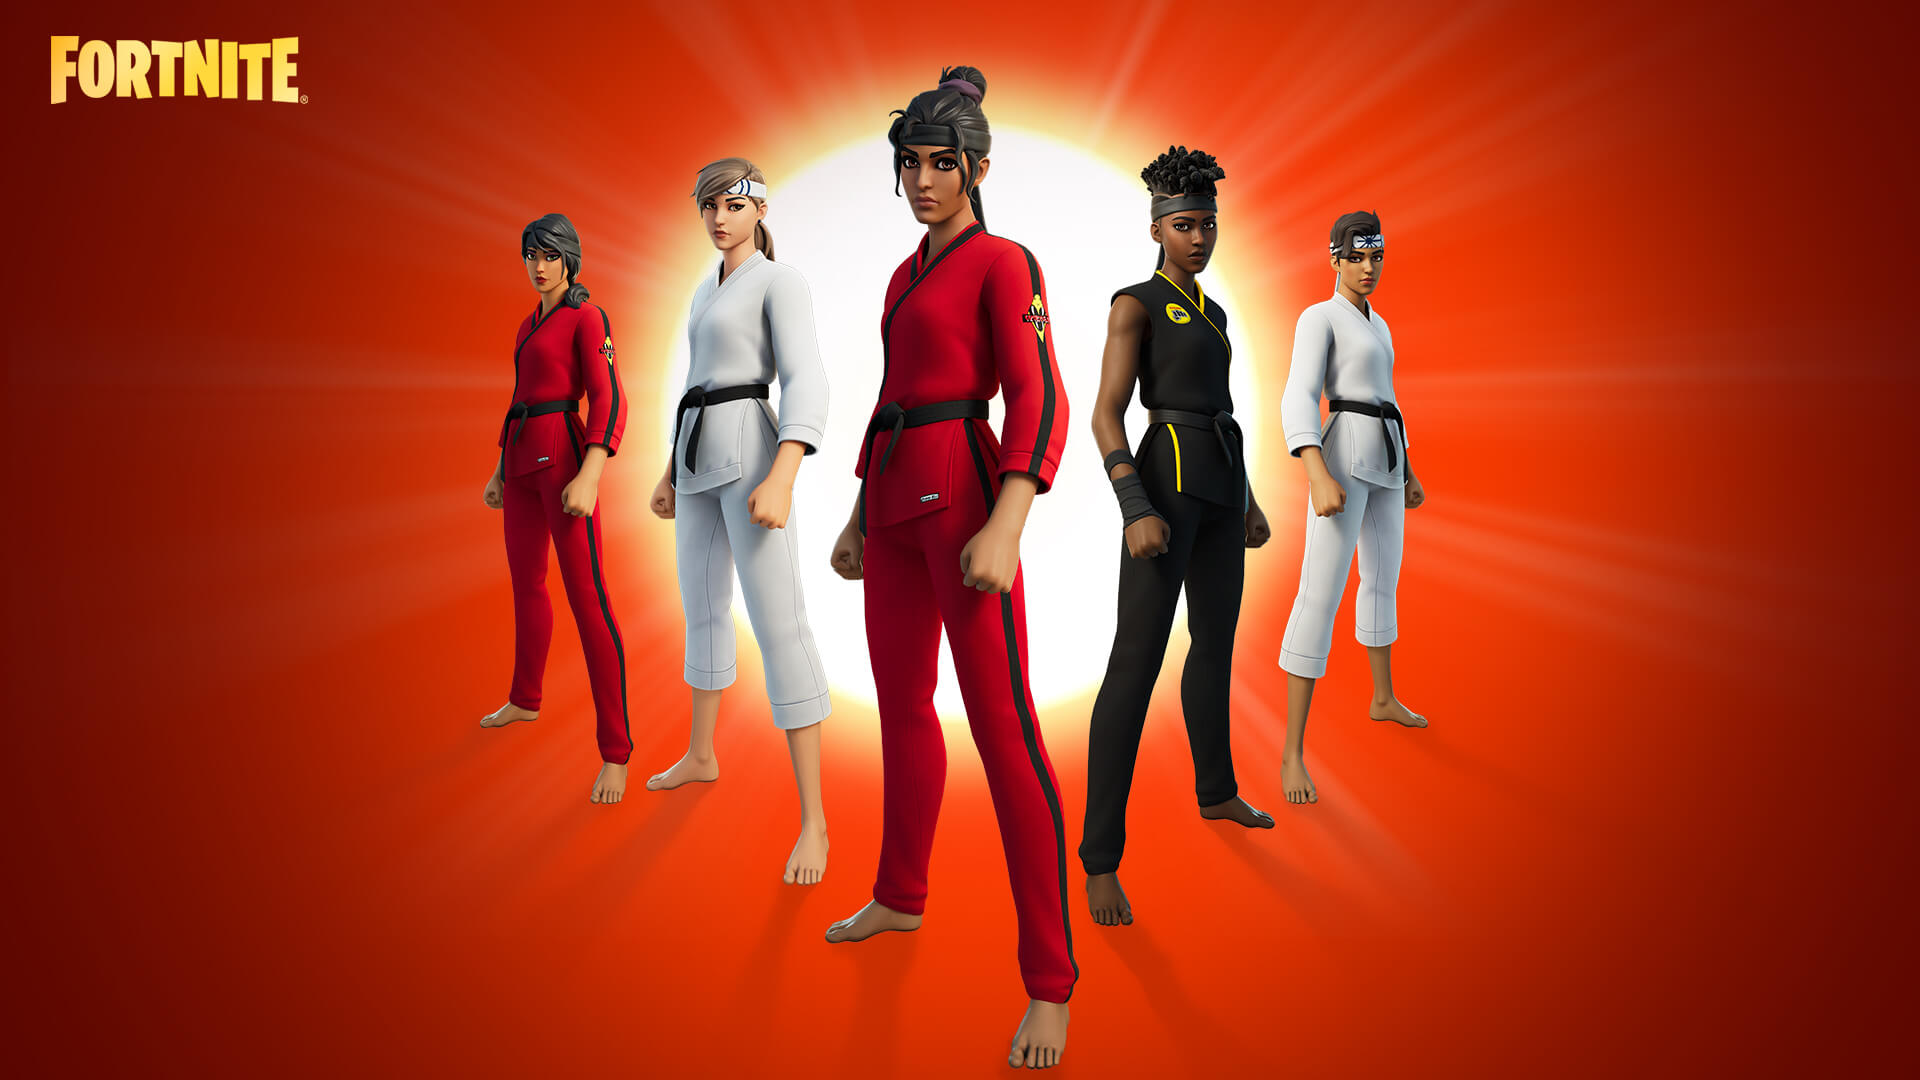 Outfits from the Cobra Kai series are already in Fortnite 